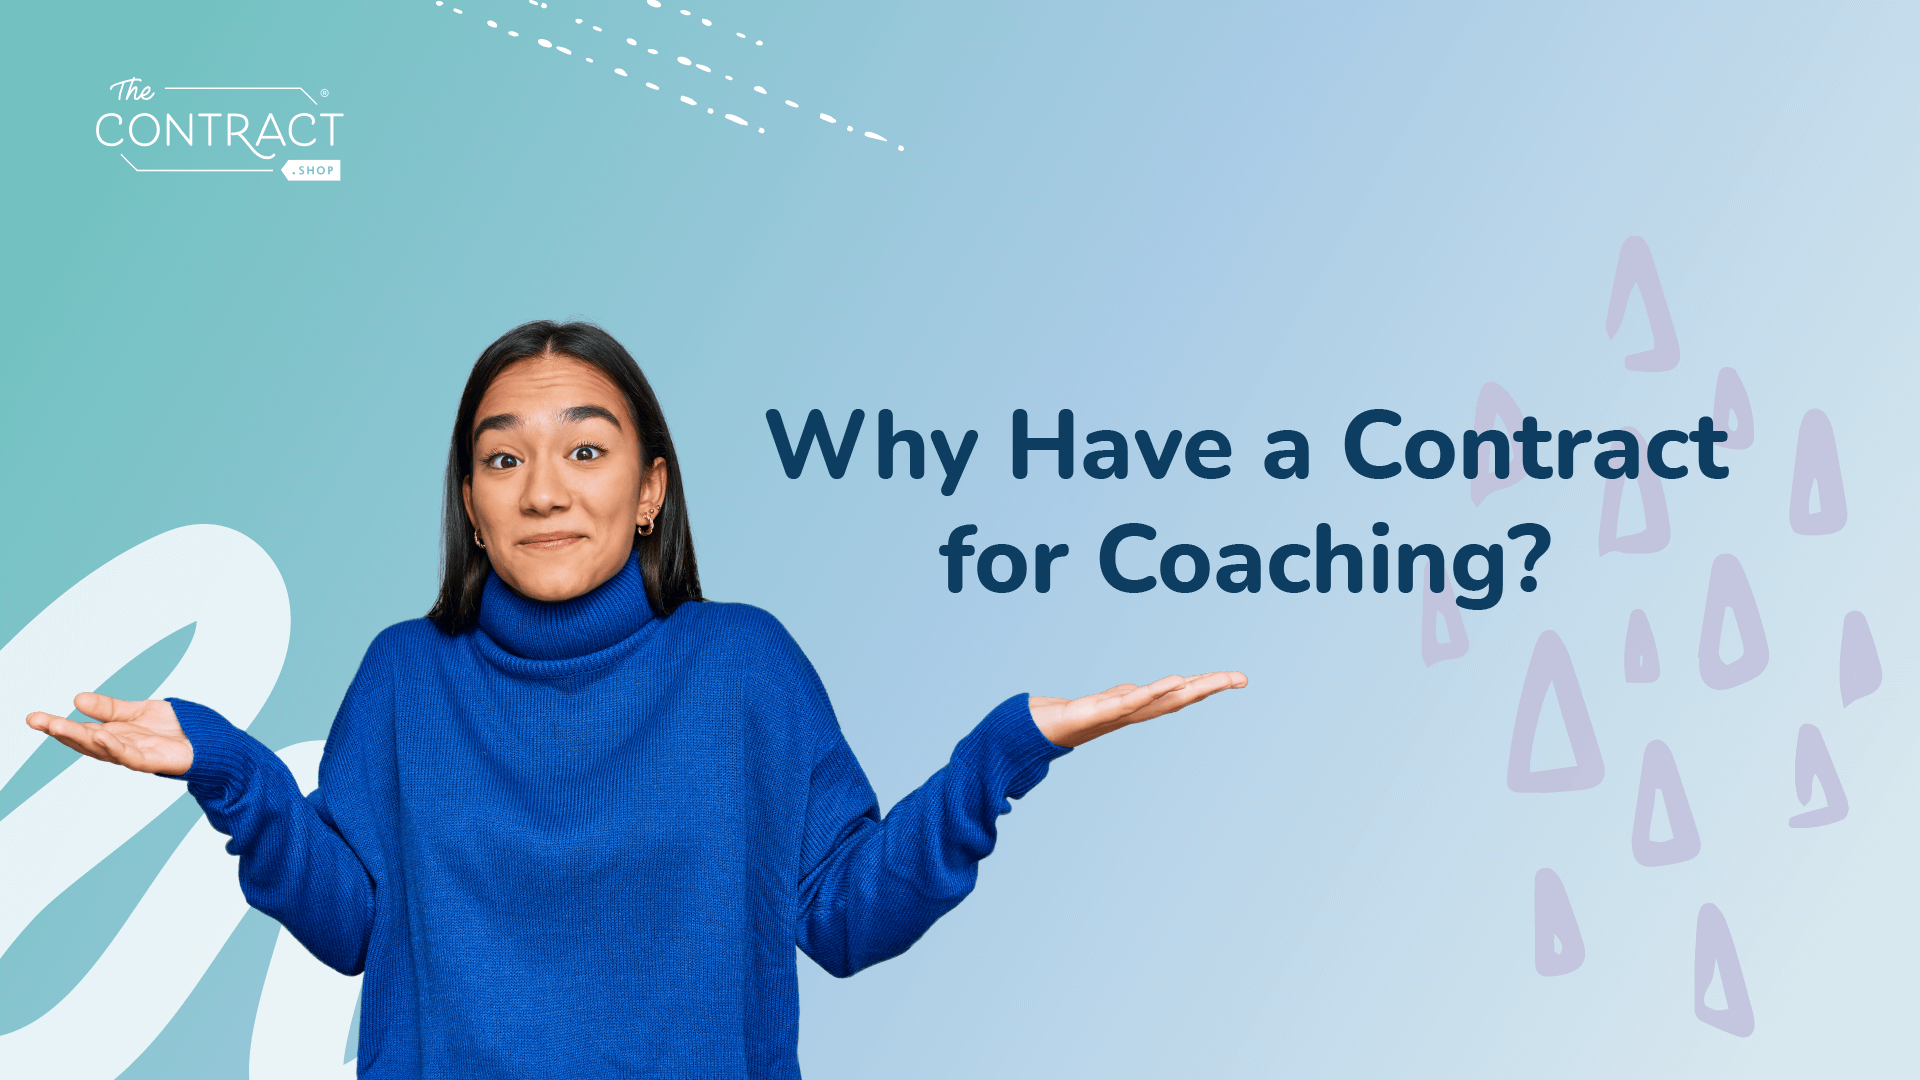 Why Have a Contract for Coaching?